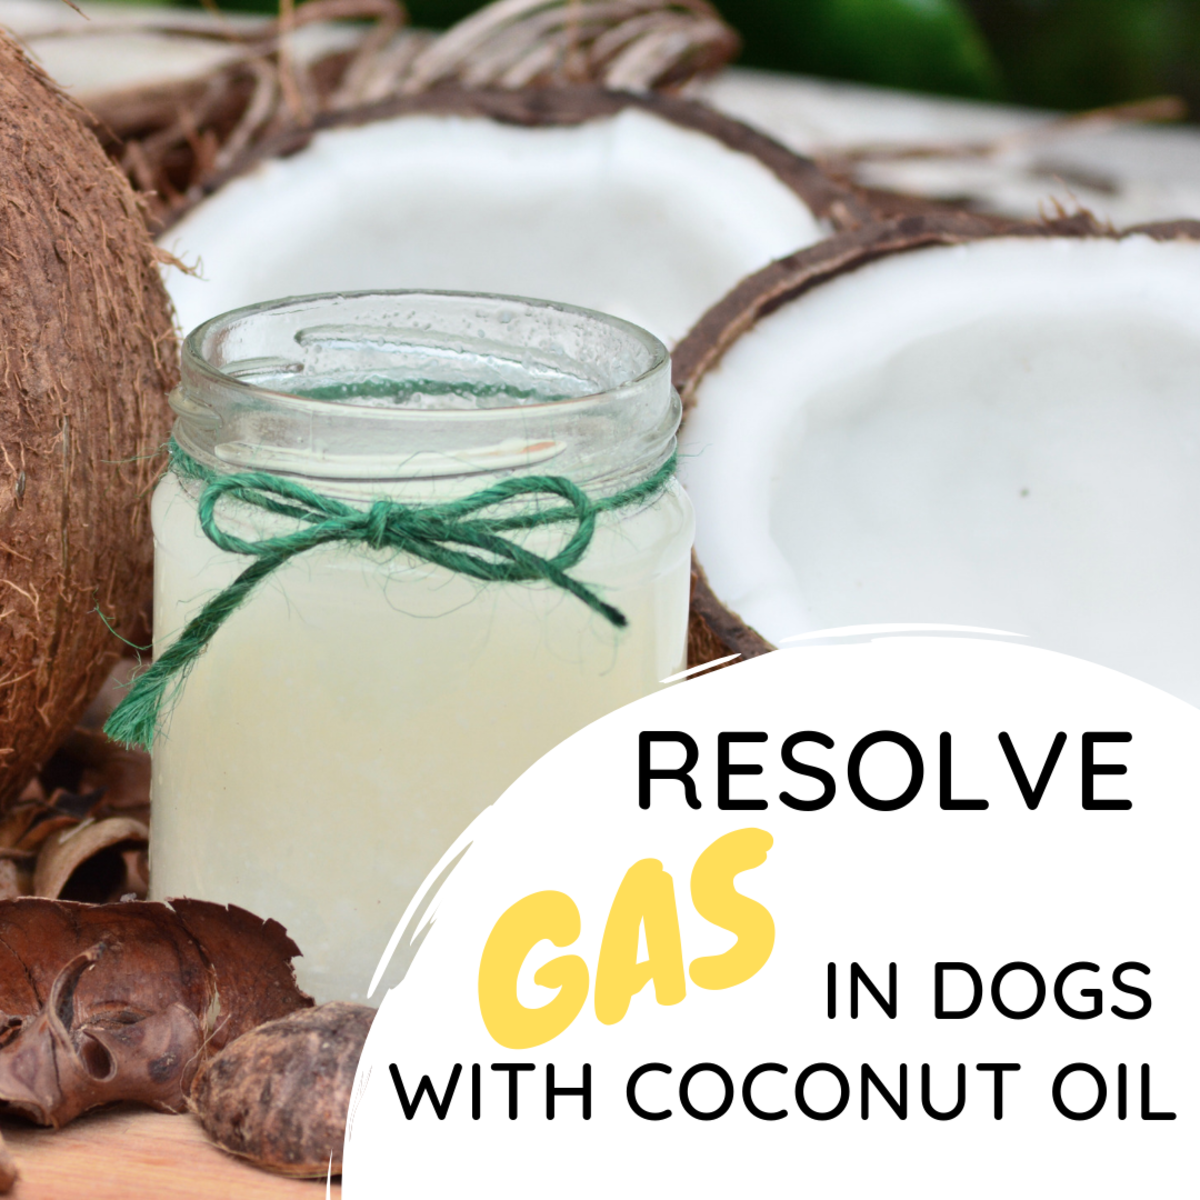 Gassy Dog? How to Stop Their Farts With Coconut Oil